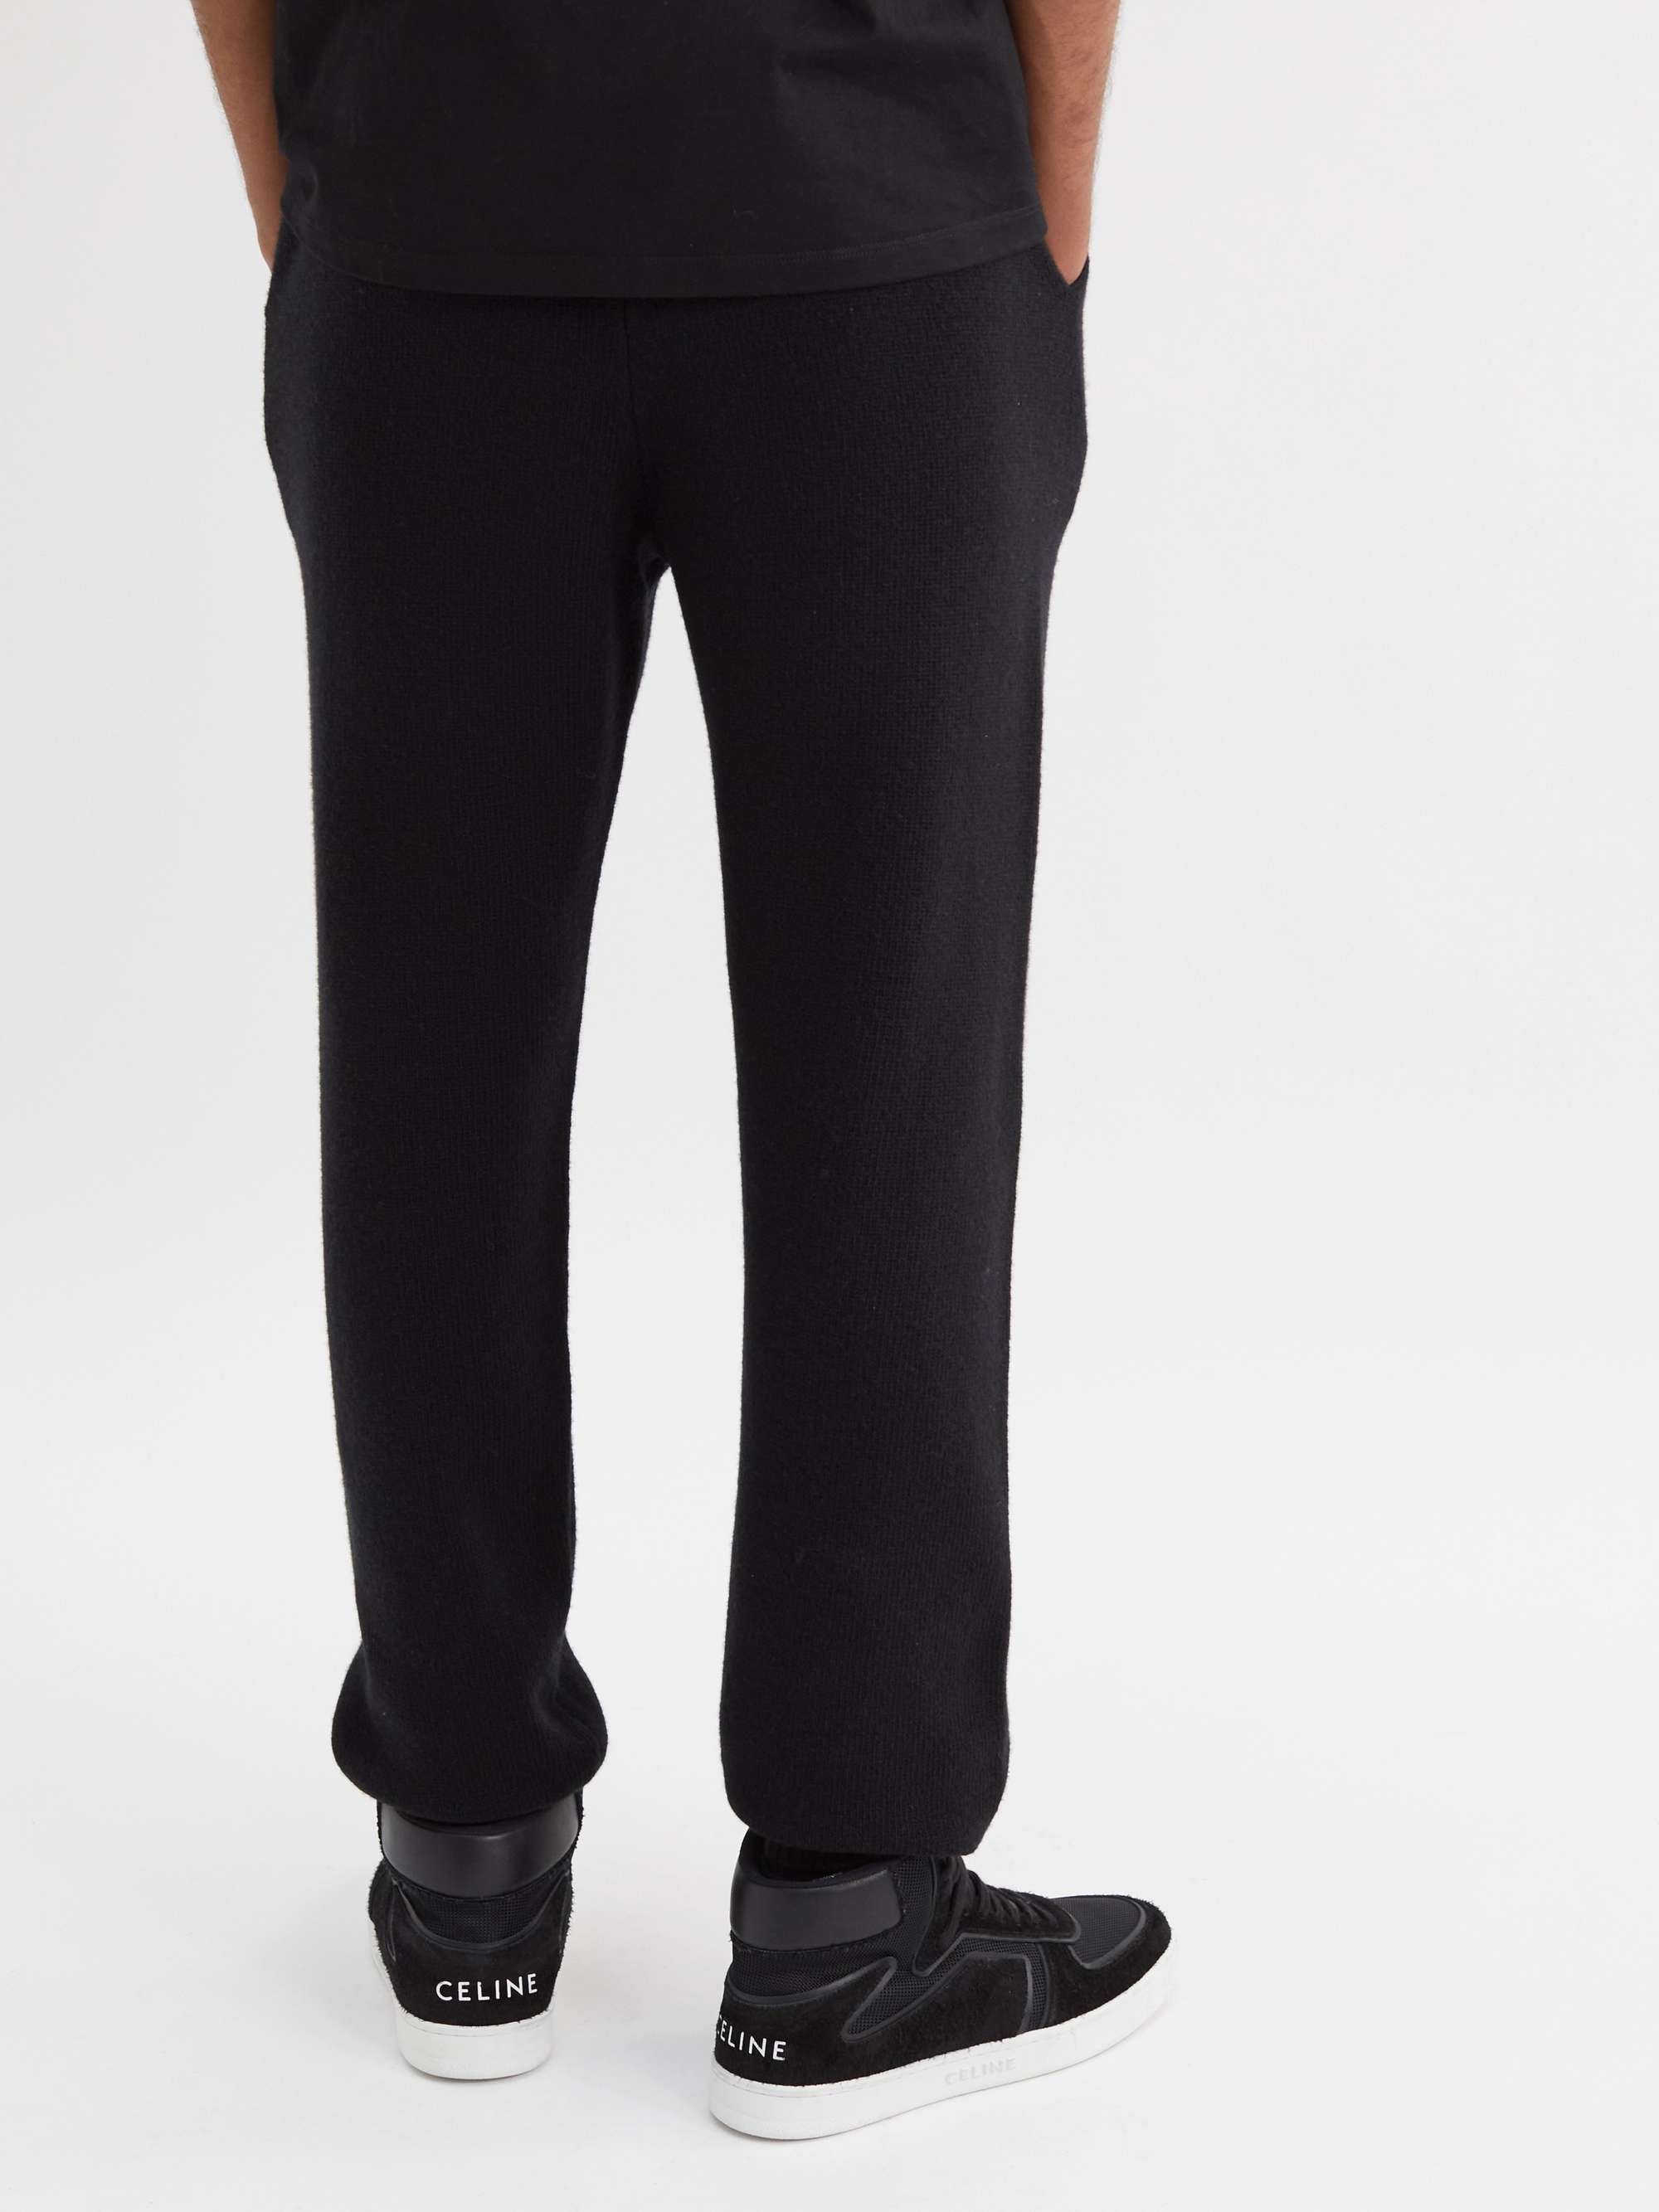 CELINE Tapered Wool and Cashmere-Blend Sweatpants